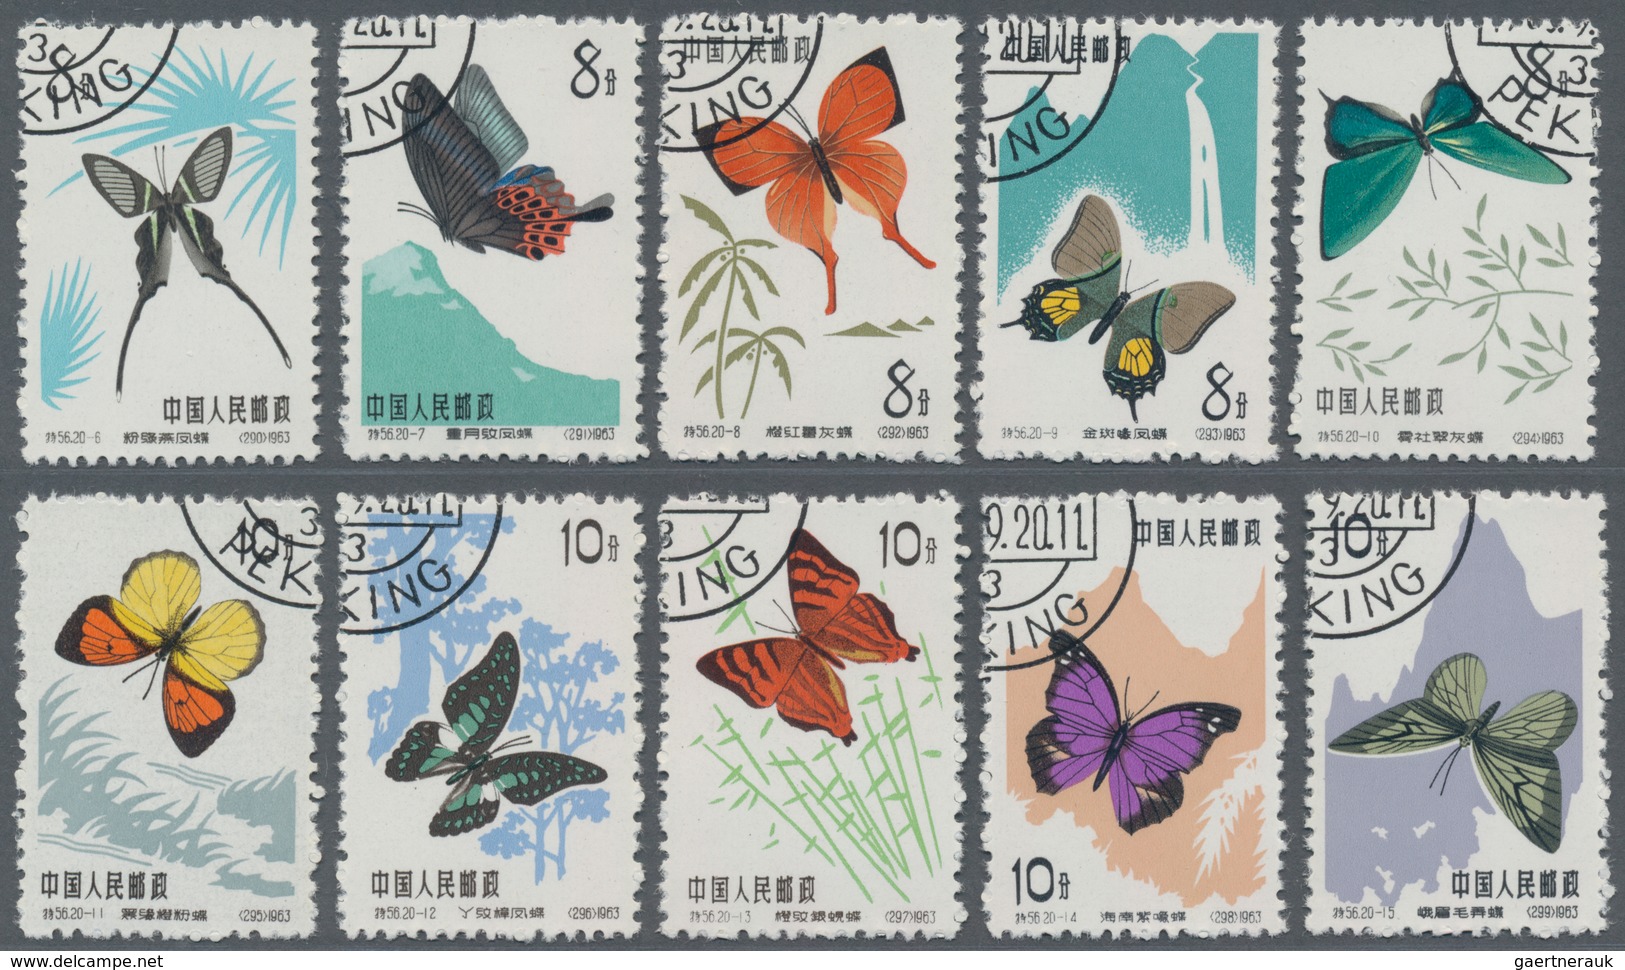 China - Volksrepublik: 1963, Butterflies, two full sets of 20, both mint no gum as issued and CTO us